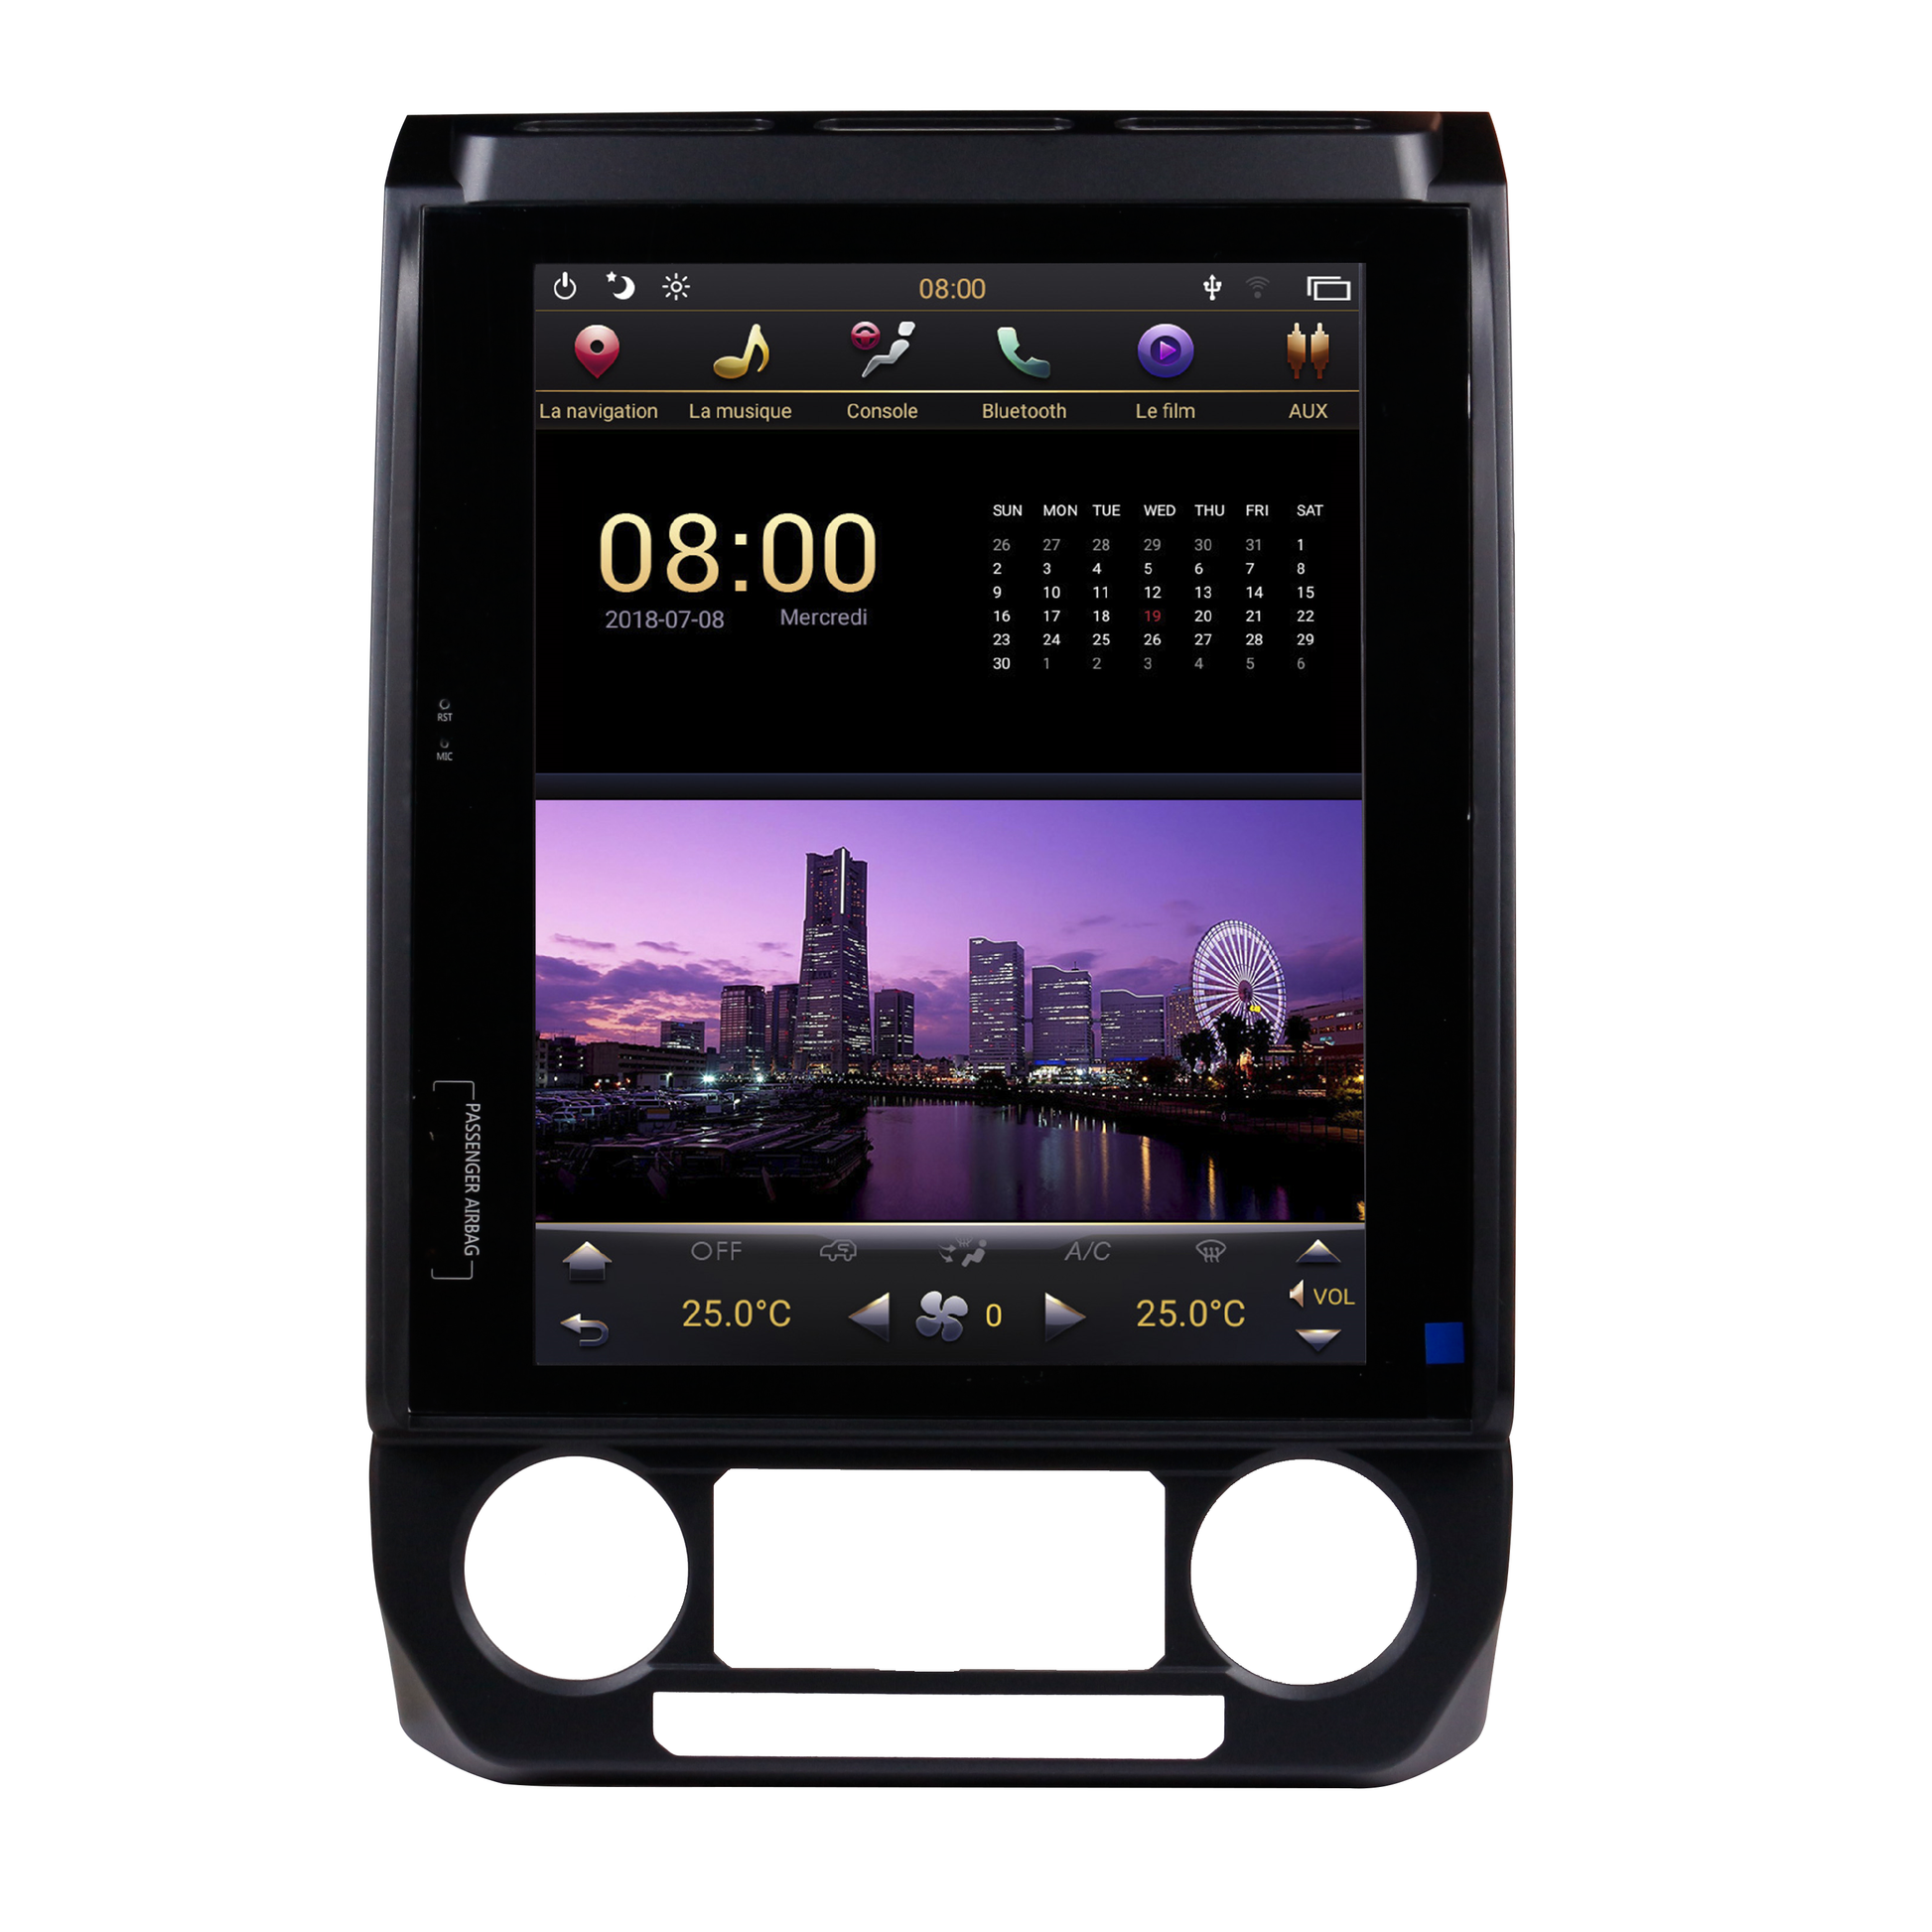 [Open box] 12.1" Android Vertical Screen Navigation Radio for Ford F-150 F-250 F-350 2015 - 2019